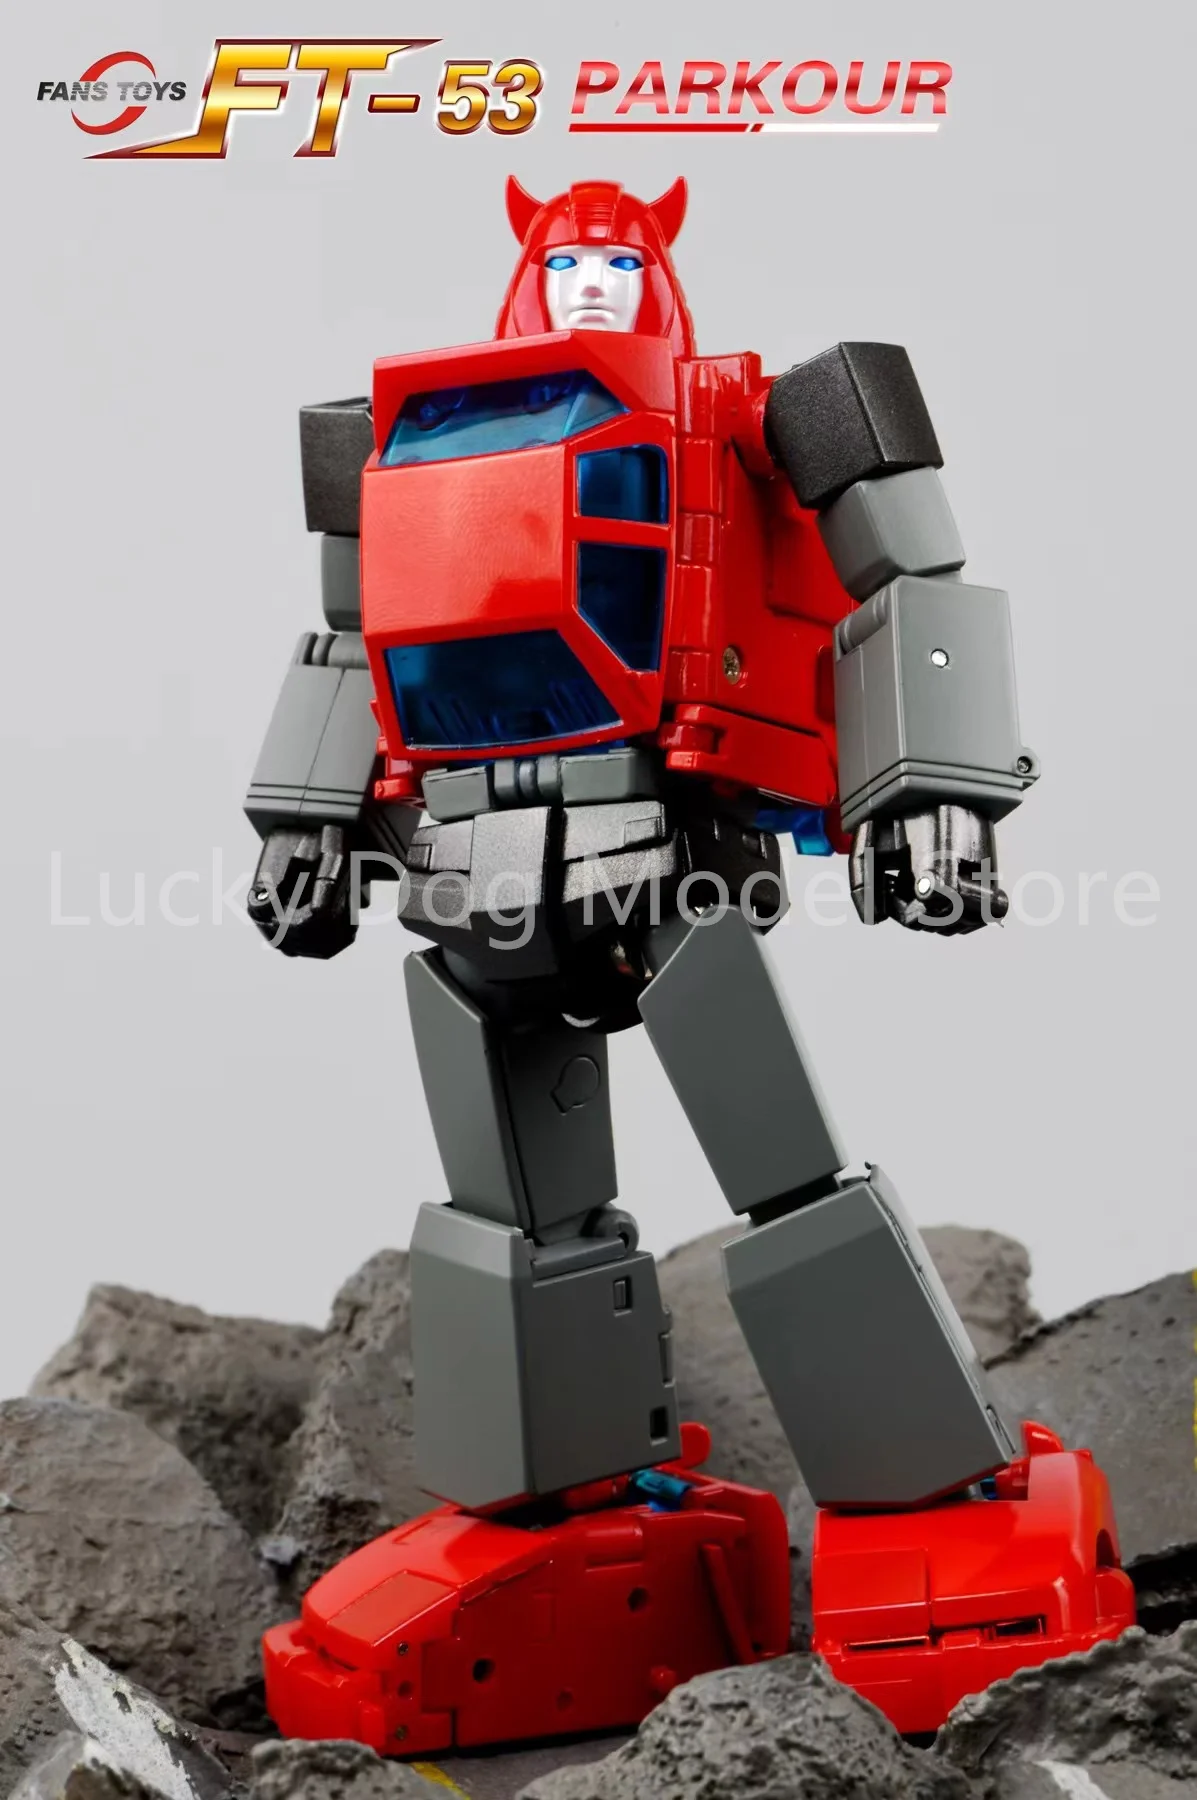 

In Stock Transformation FT FansToys FT53 FT-53 Collectable Action Figure Robot Deformed Gift